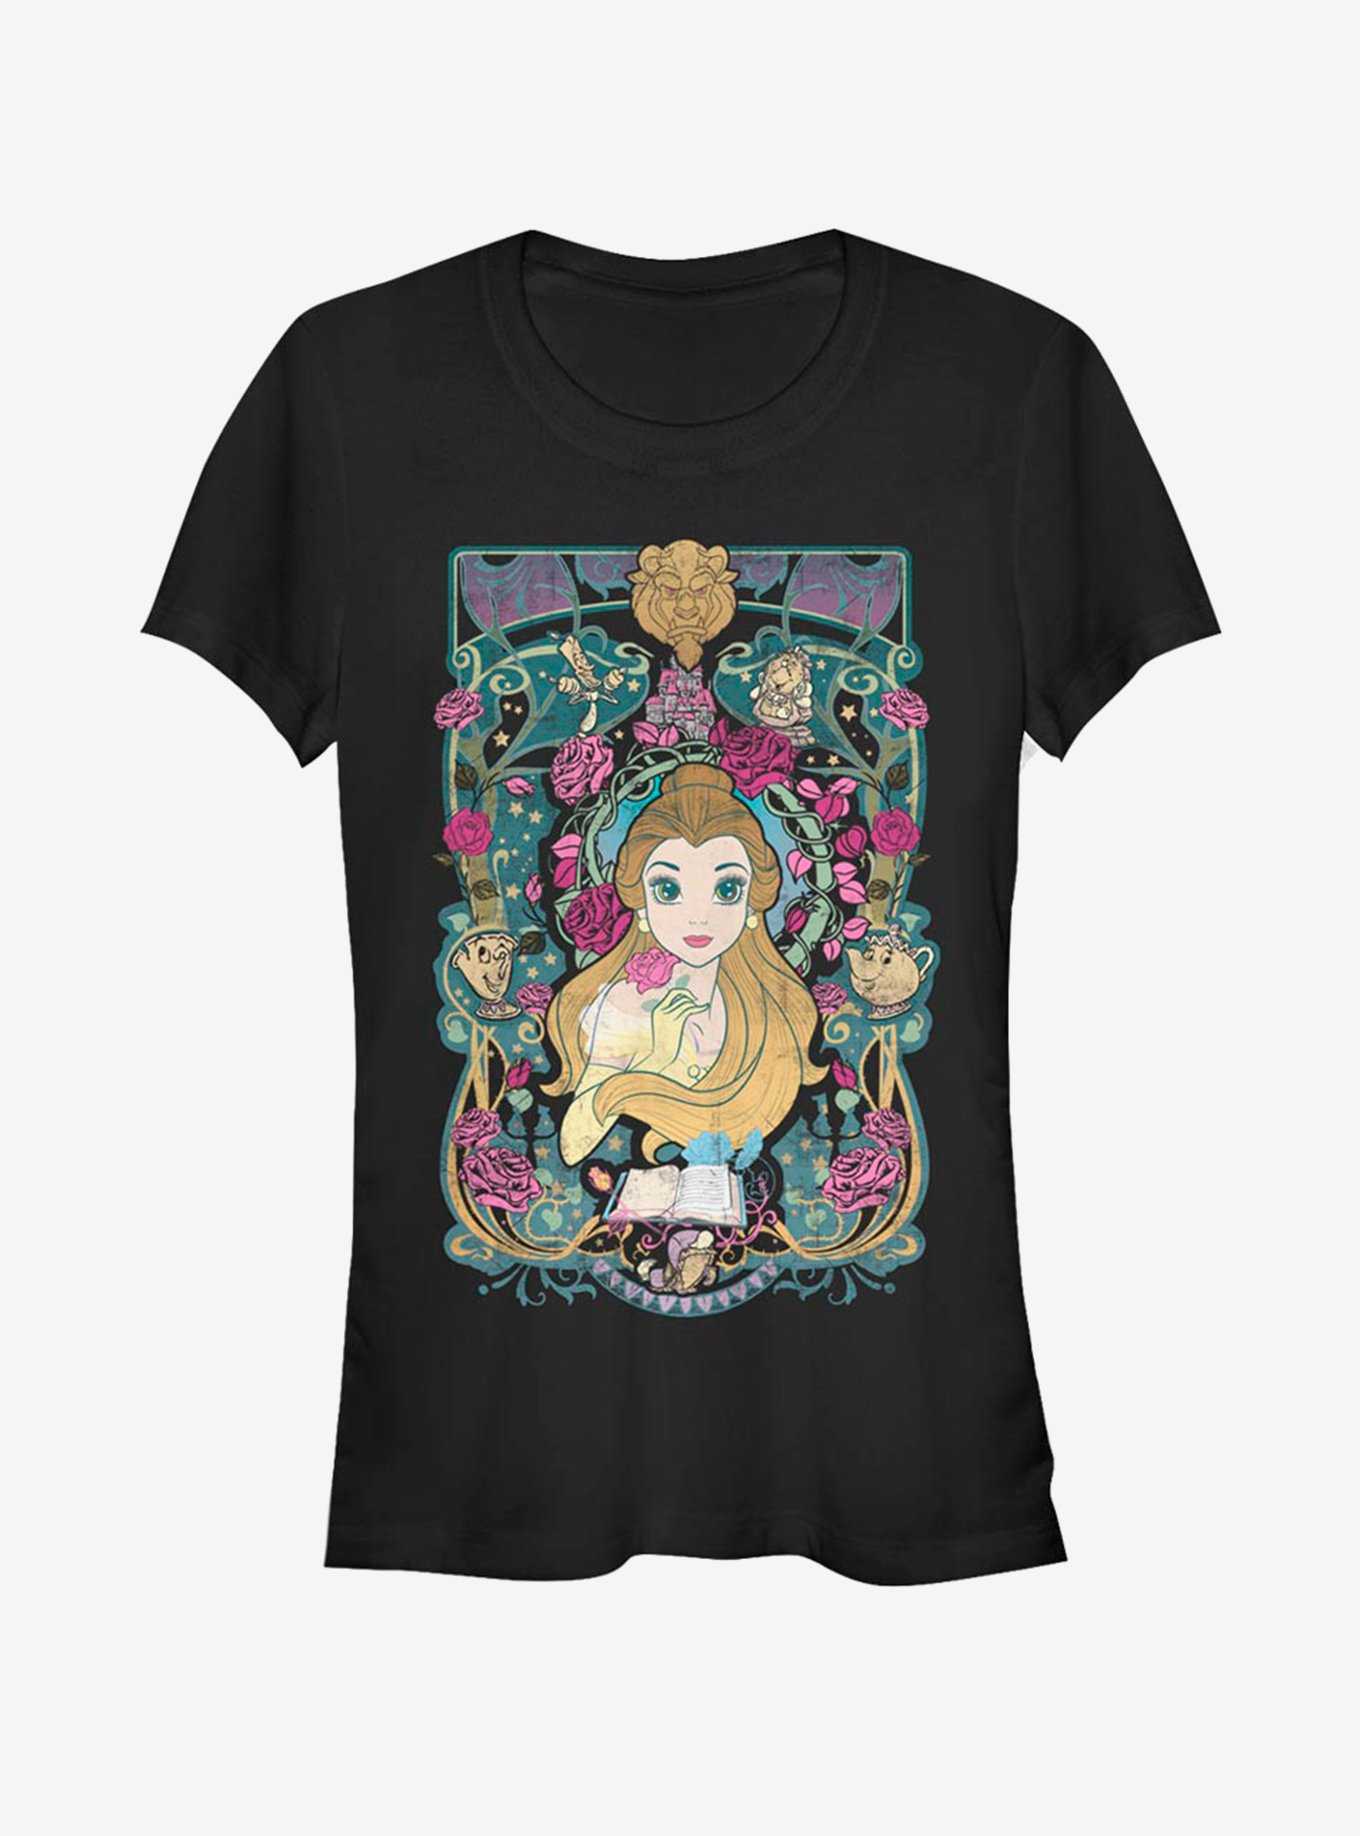 Disney Beauty And The Beast Belle Veau Girls T-Shirt, , hi-res